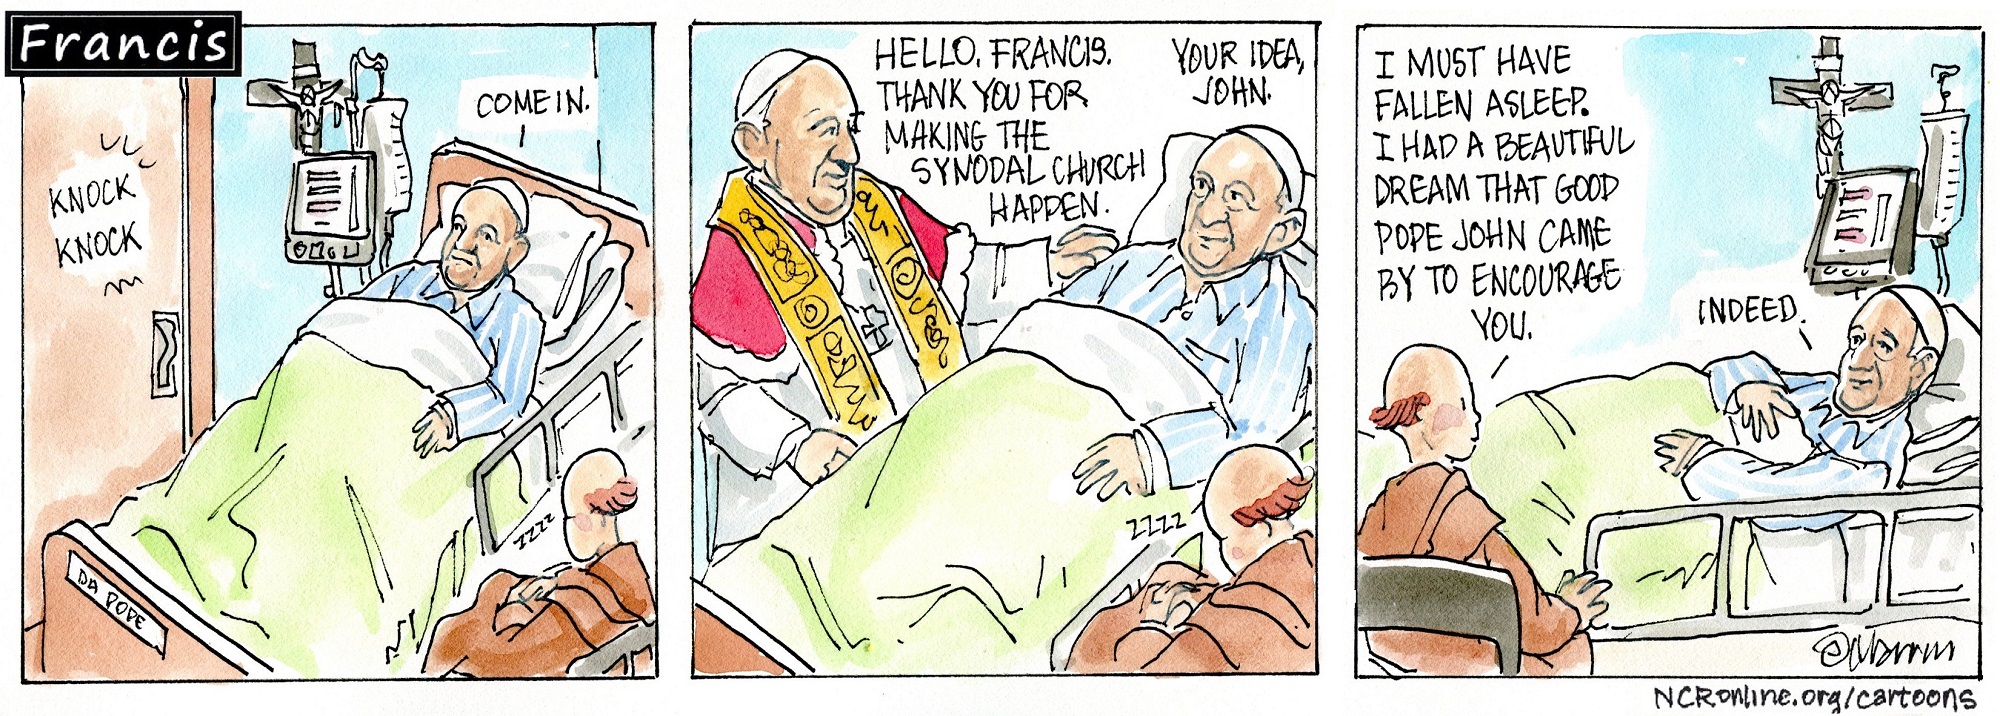 Francis, the comic strip: Francis is visited by a friendly face while recovering in the hospital.